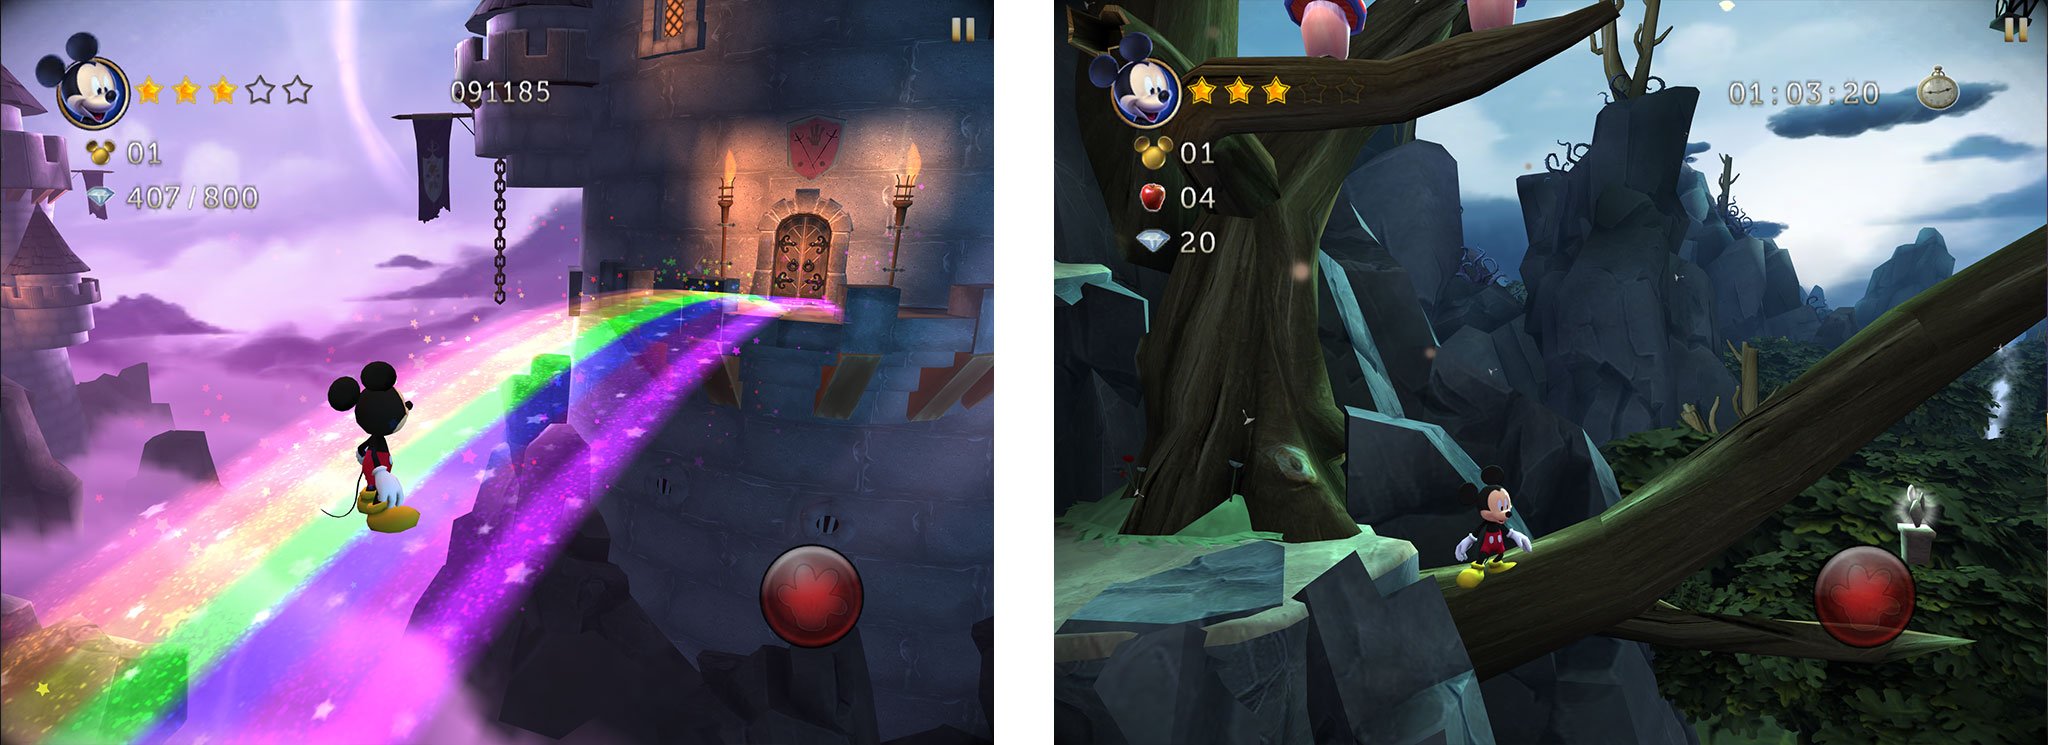 Castle of Illusion tips, tricks, and cheats: Replay levels to collect more diamonds